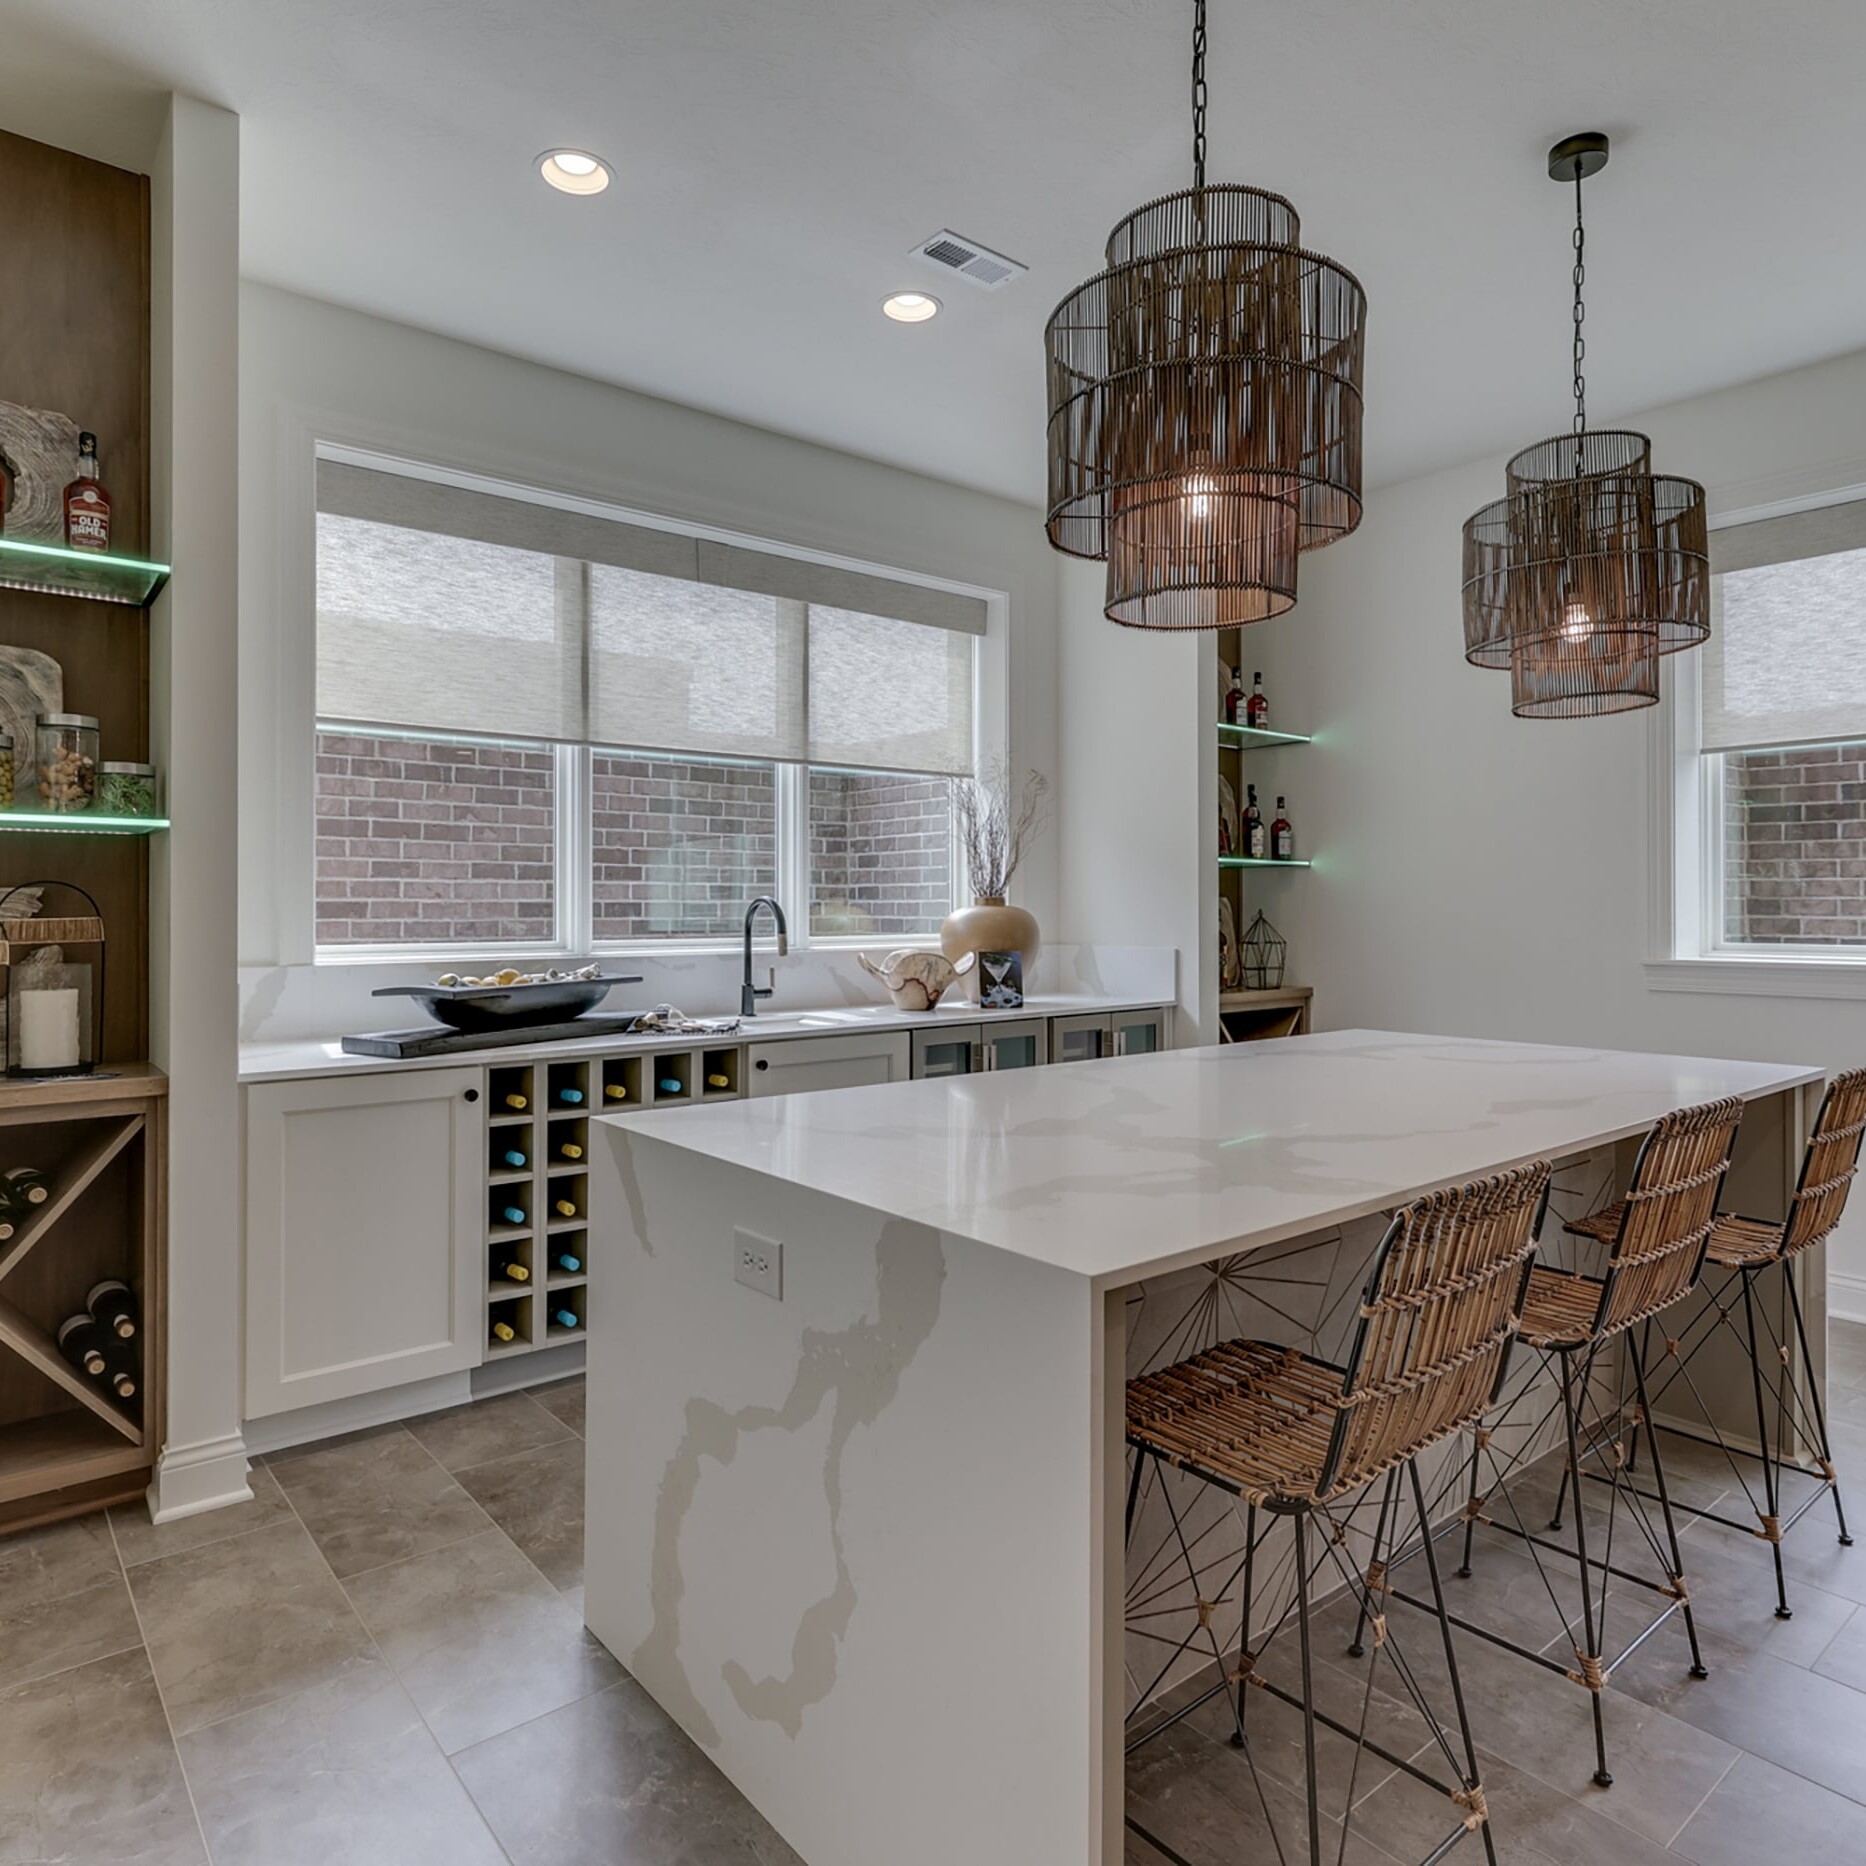 A kitchen with a wine rack and bar stools.